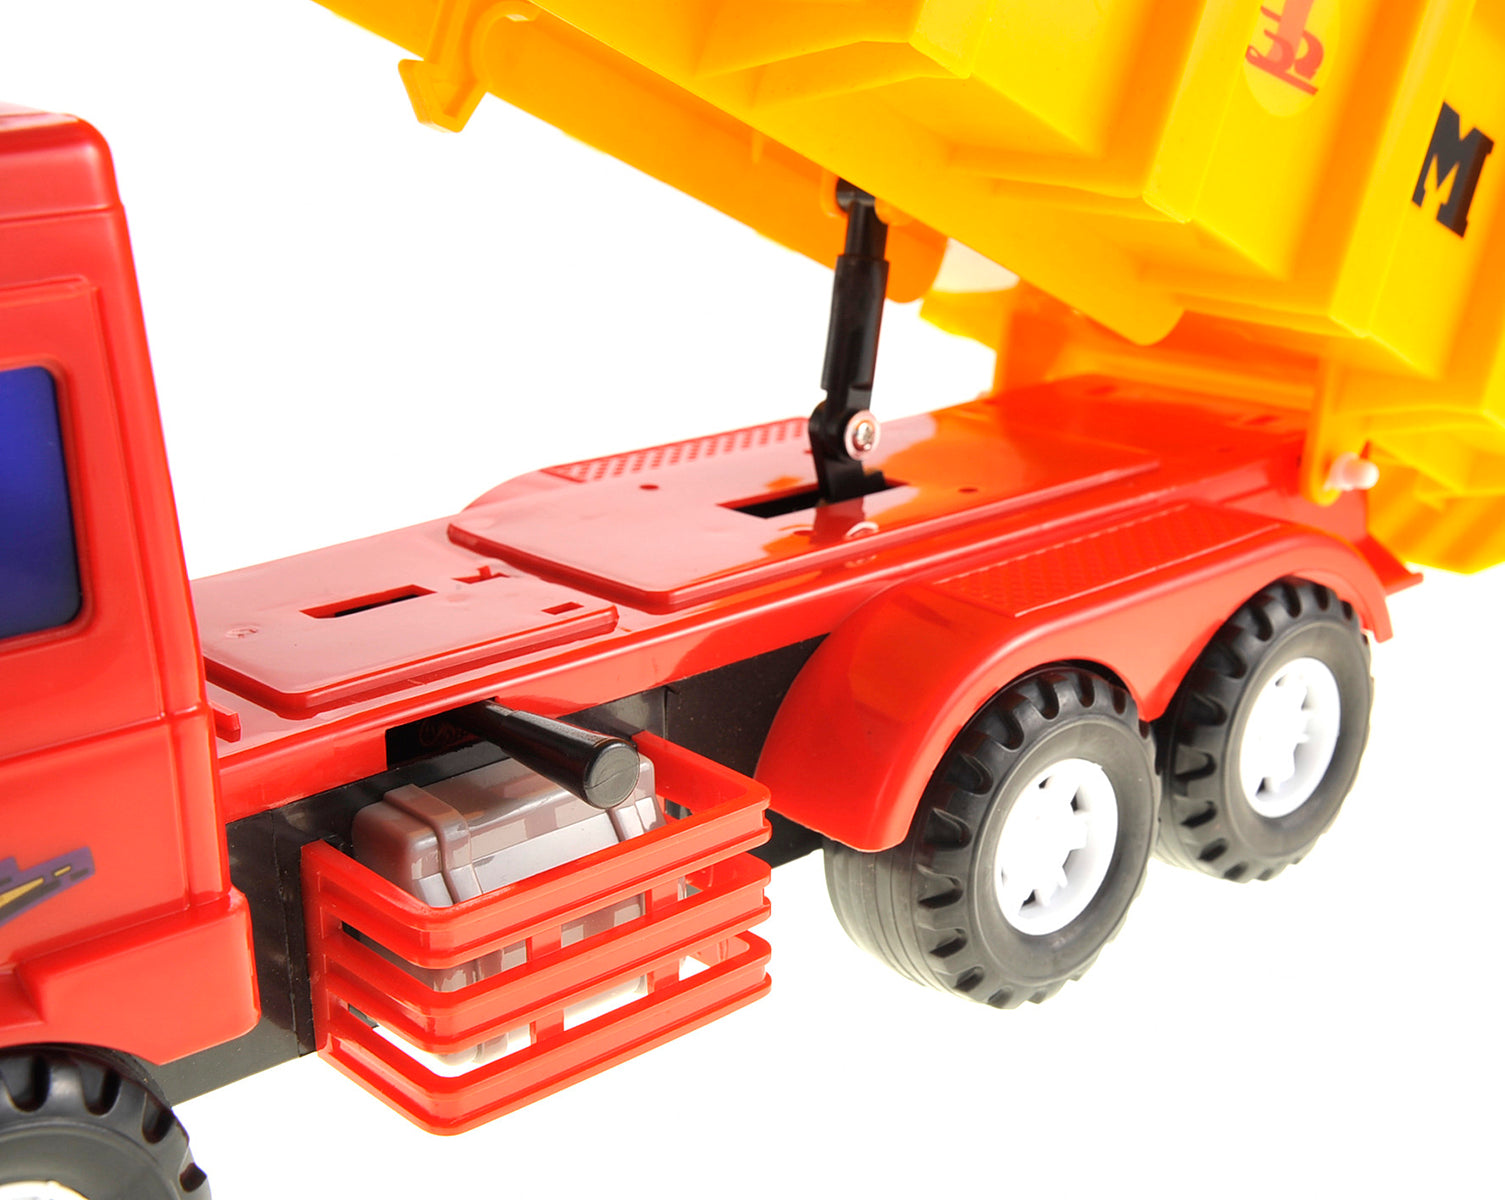 Big Dump Truck Toy for Kids with Friction Power (Heavy Duty)